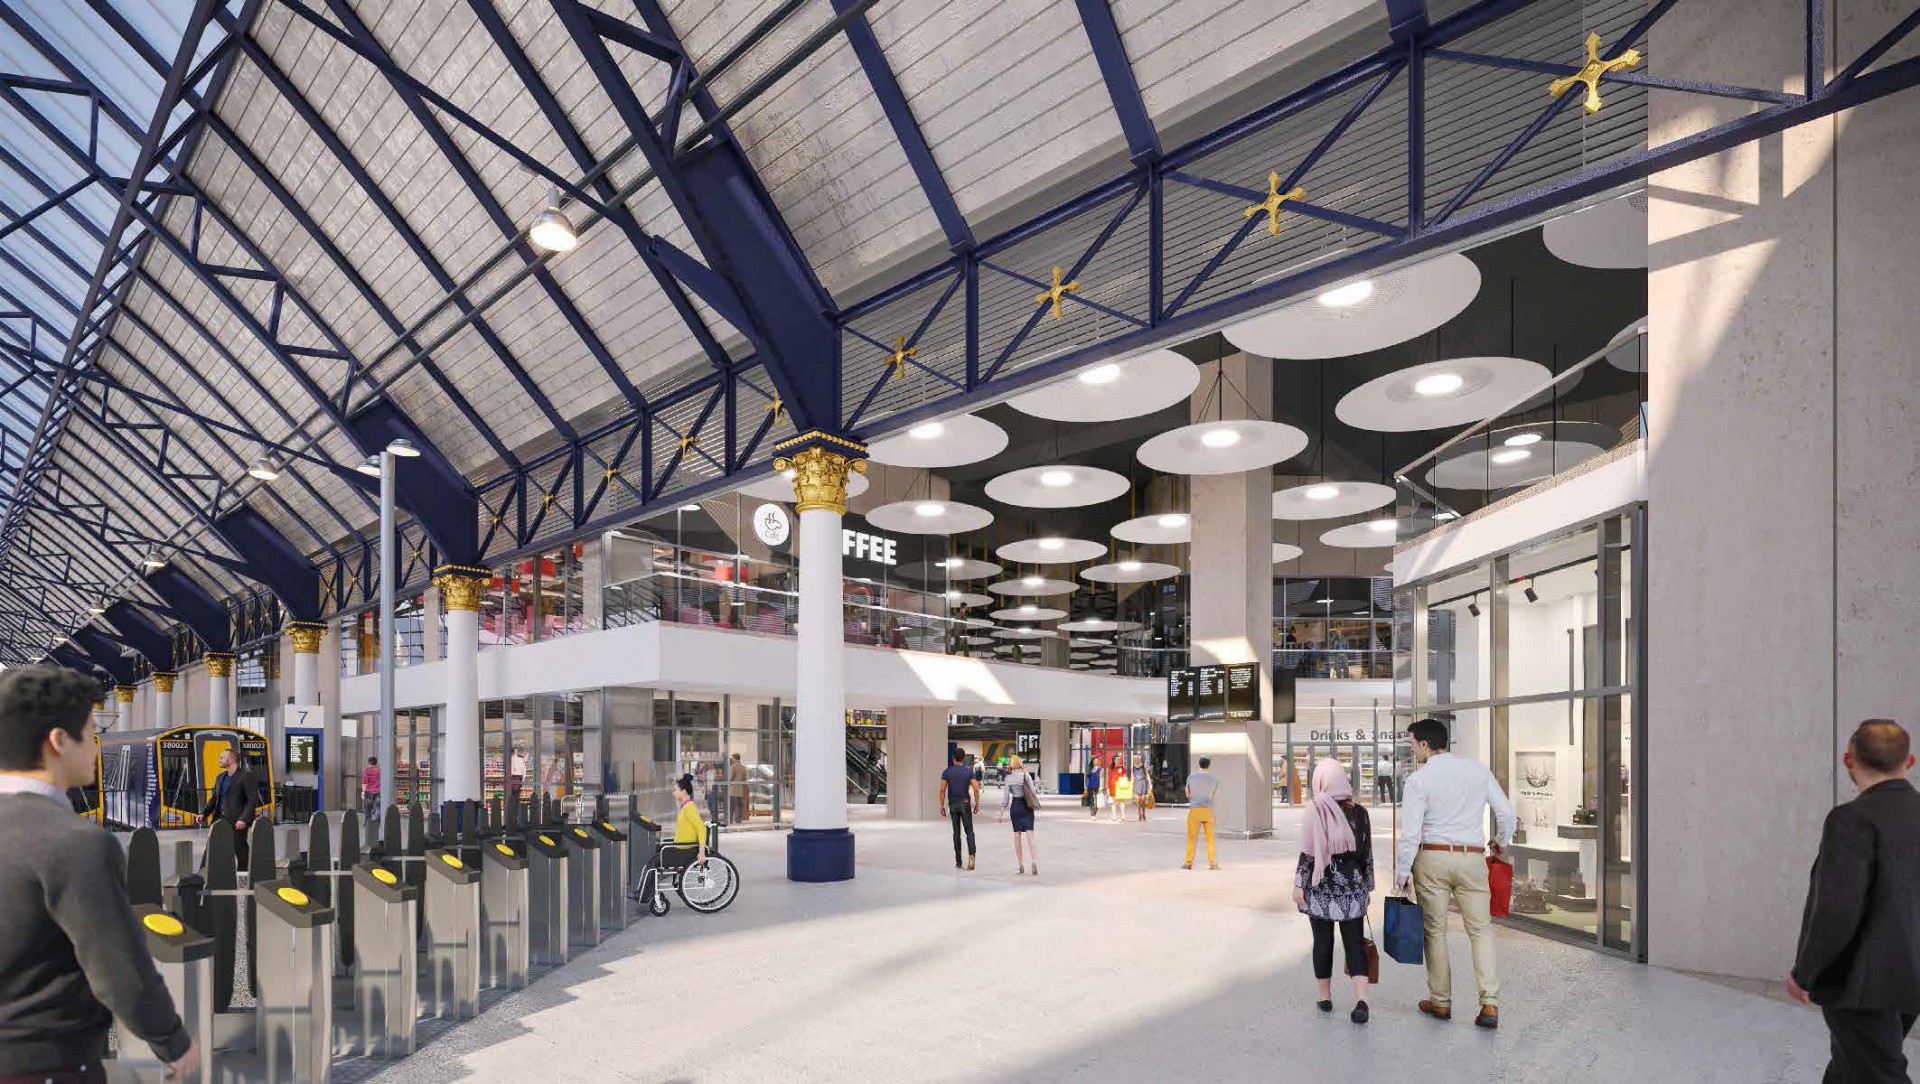 Eastern podium extension planned at Queen Street Station